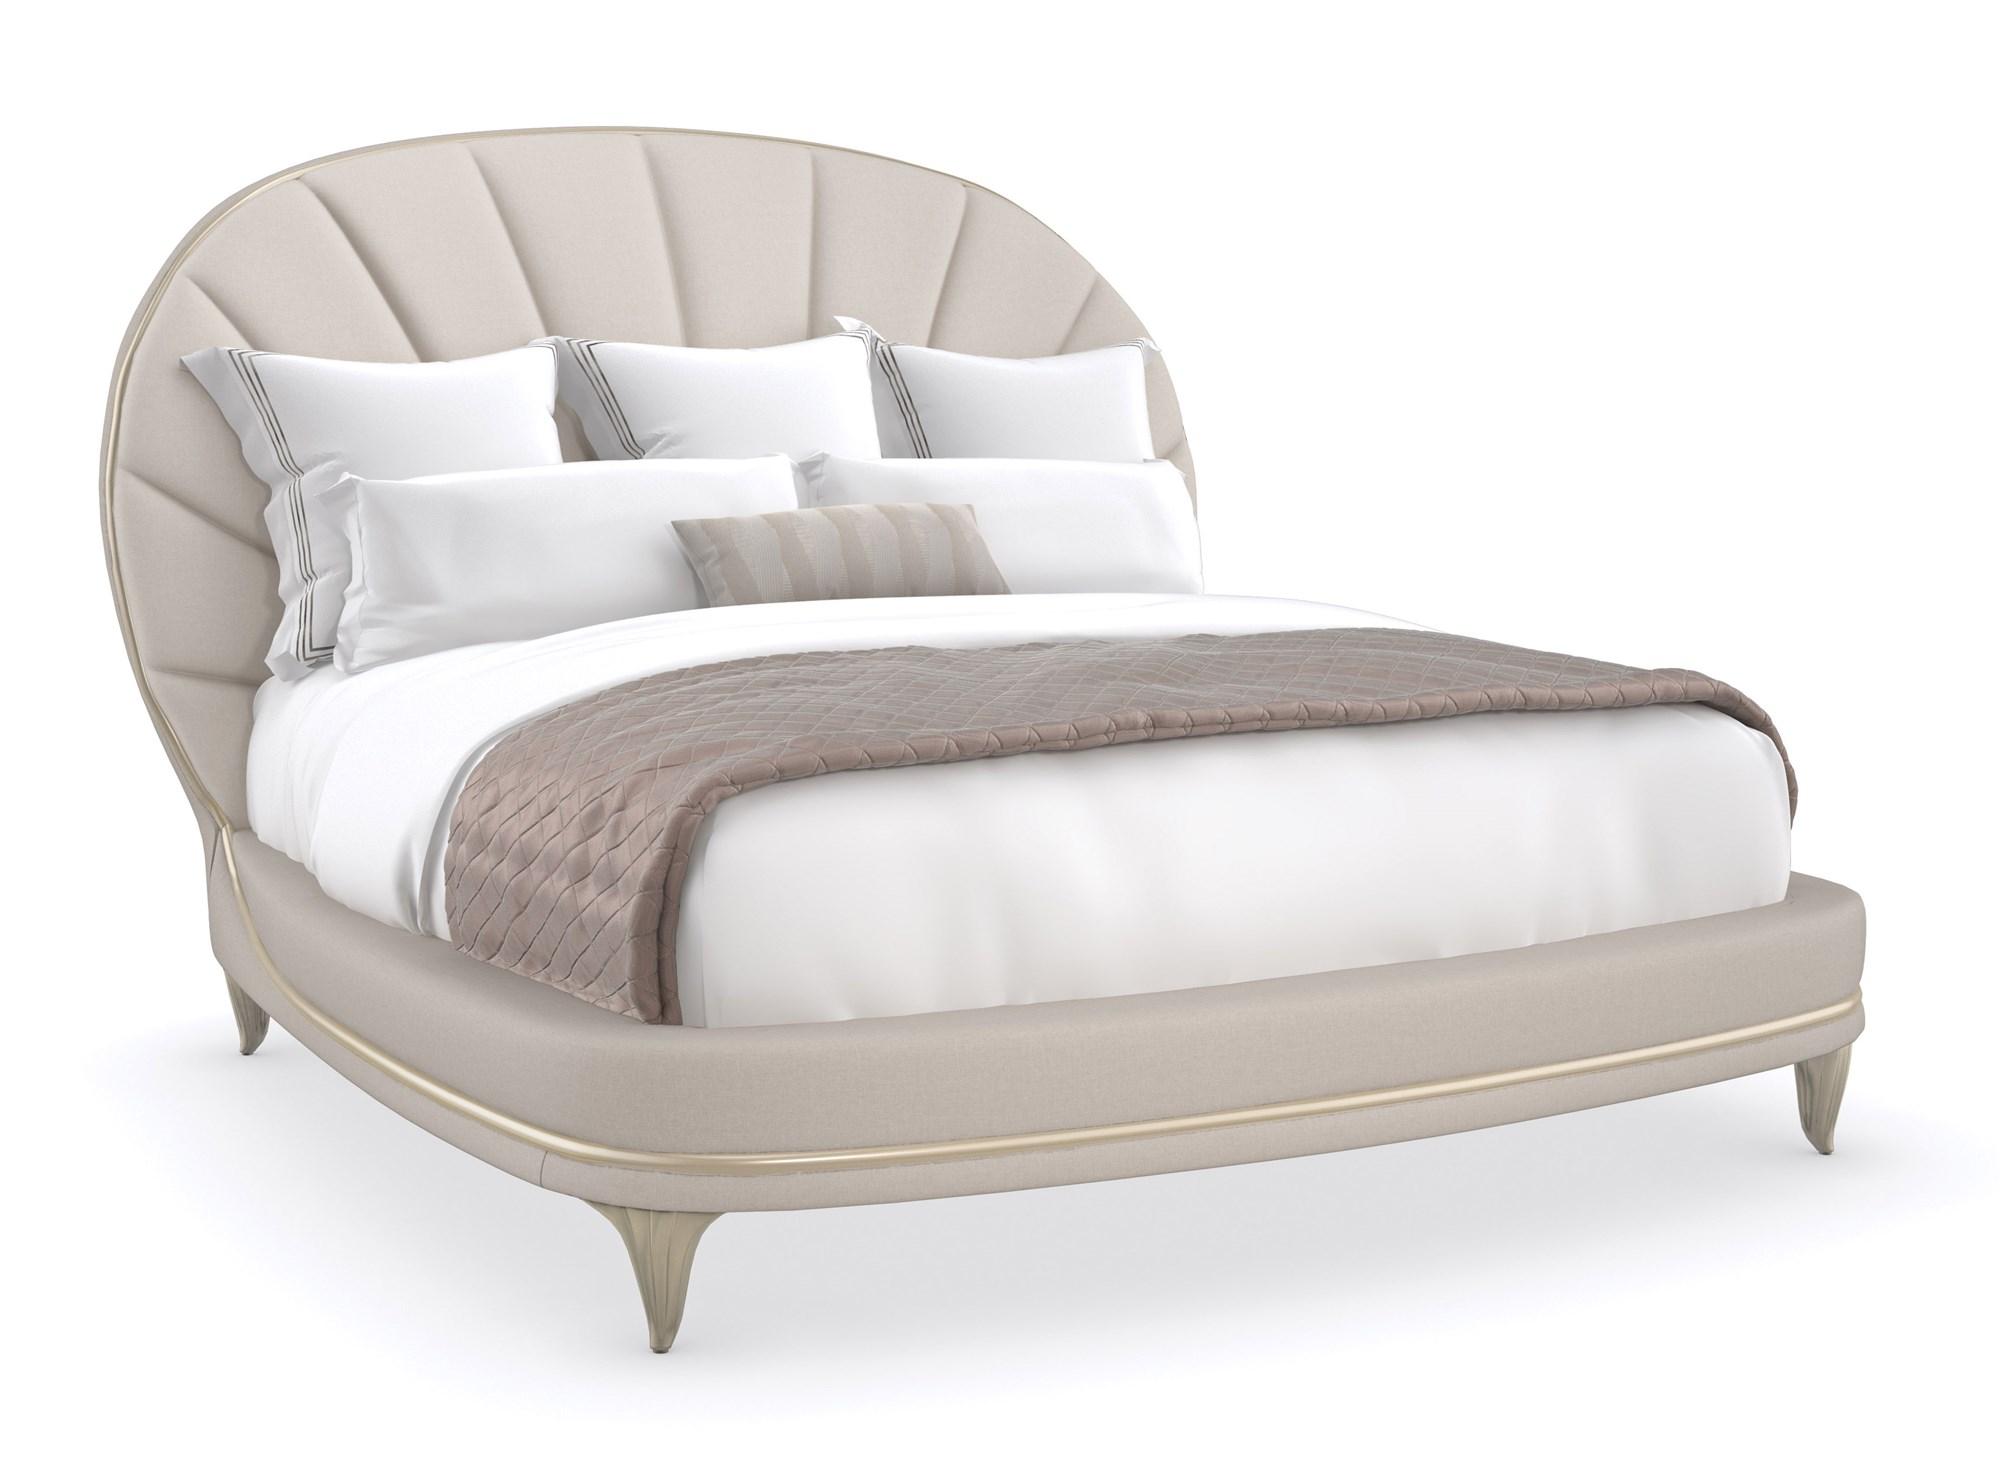 Contemporary Platform Bed LILLIAN C093-020-141-CK in Taupe, Gold Fabric